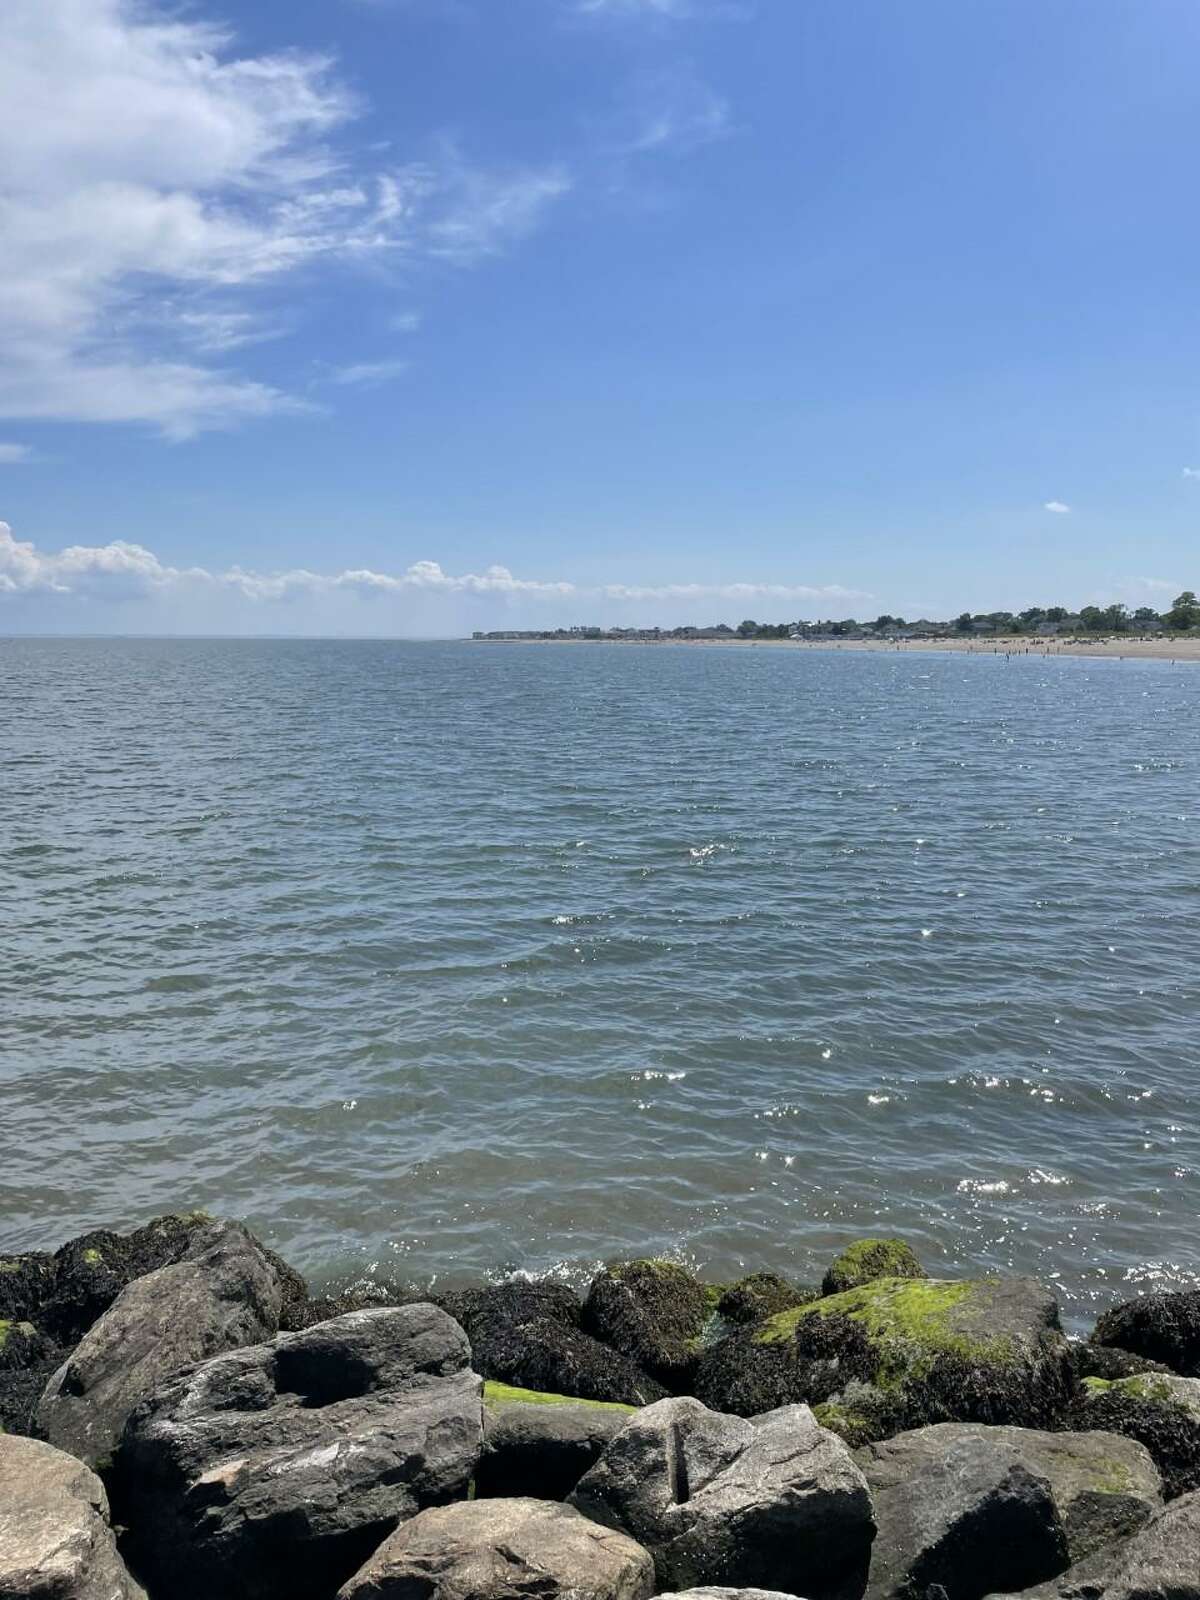 Fairfield resident Matthew Podolsky has submitted this weather photo by email. The photo is from the Jennings Beach in Fairfield, and the Penfield Beach in Fairfield, and on the Long Island with temperatures at 81 degrees Fahrenheit at 3 p.m. June 24.